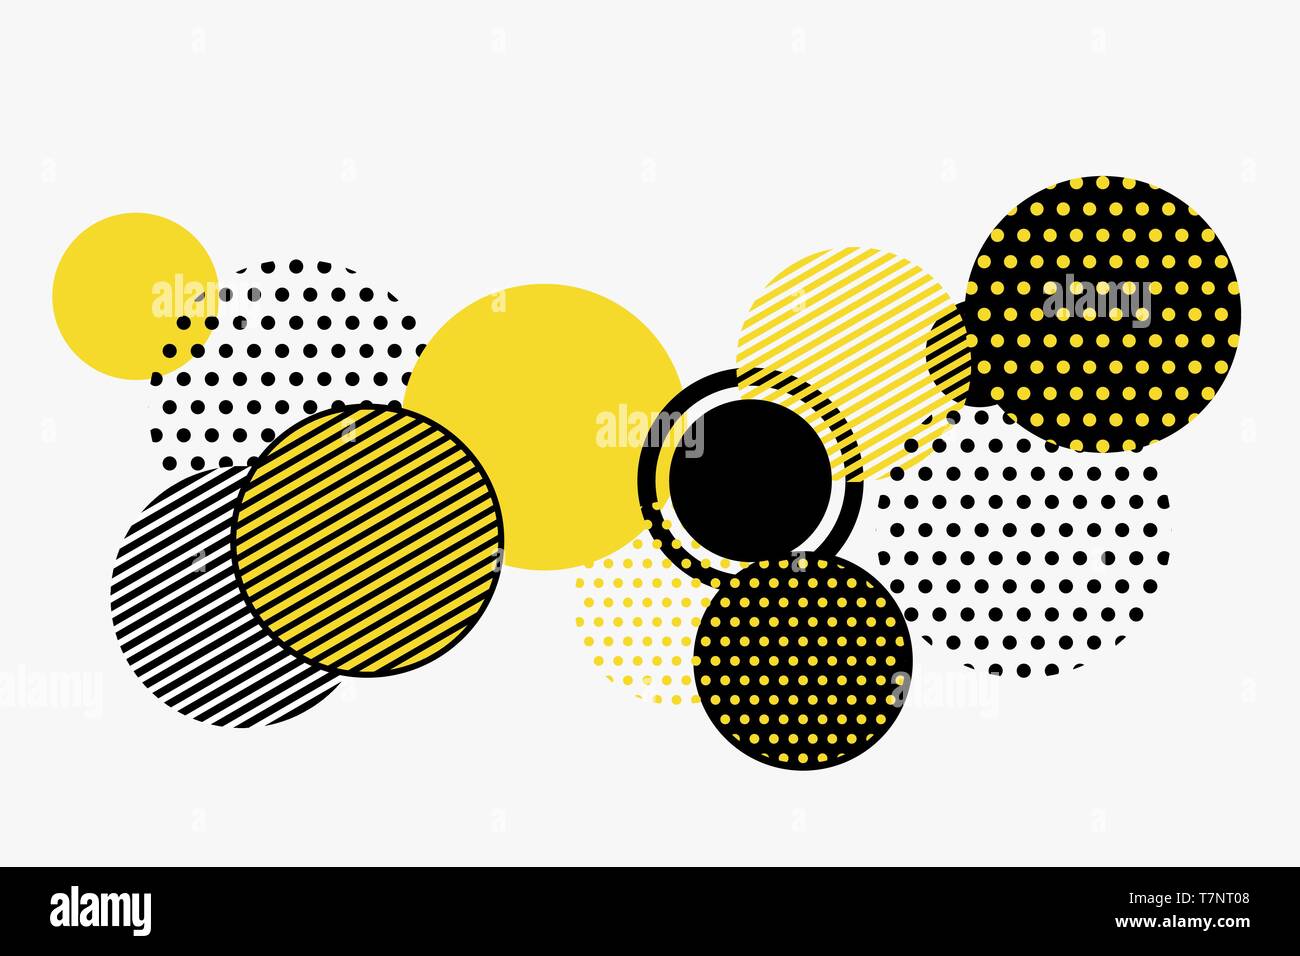 Abstract black and yellow geometric shape pattern vector design. You can use for ad, poster, artwork, trendy design. illustration vector eps10 Stock Vector